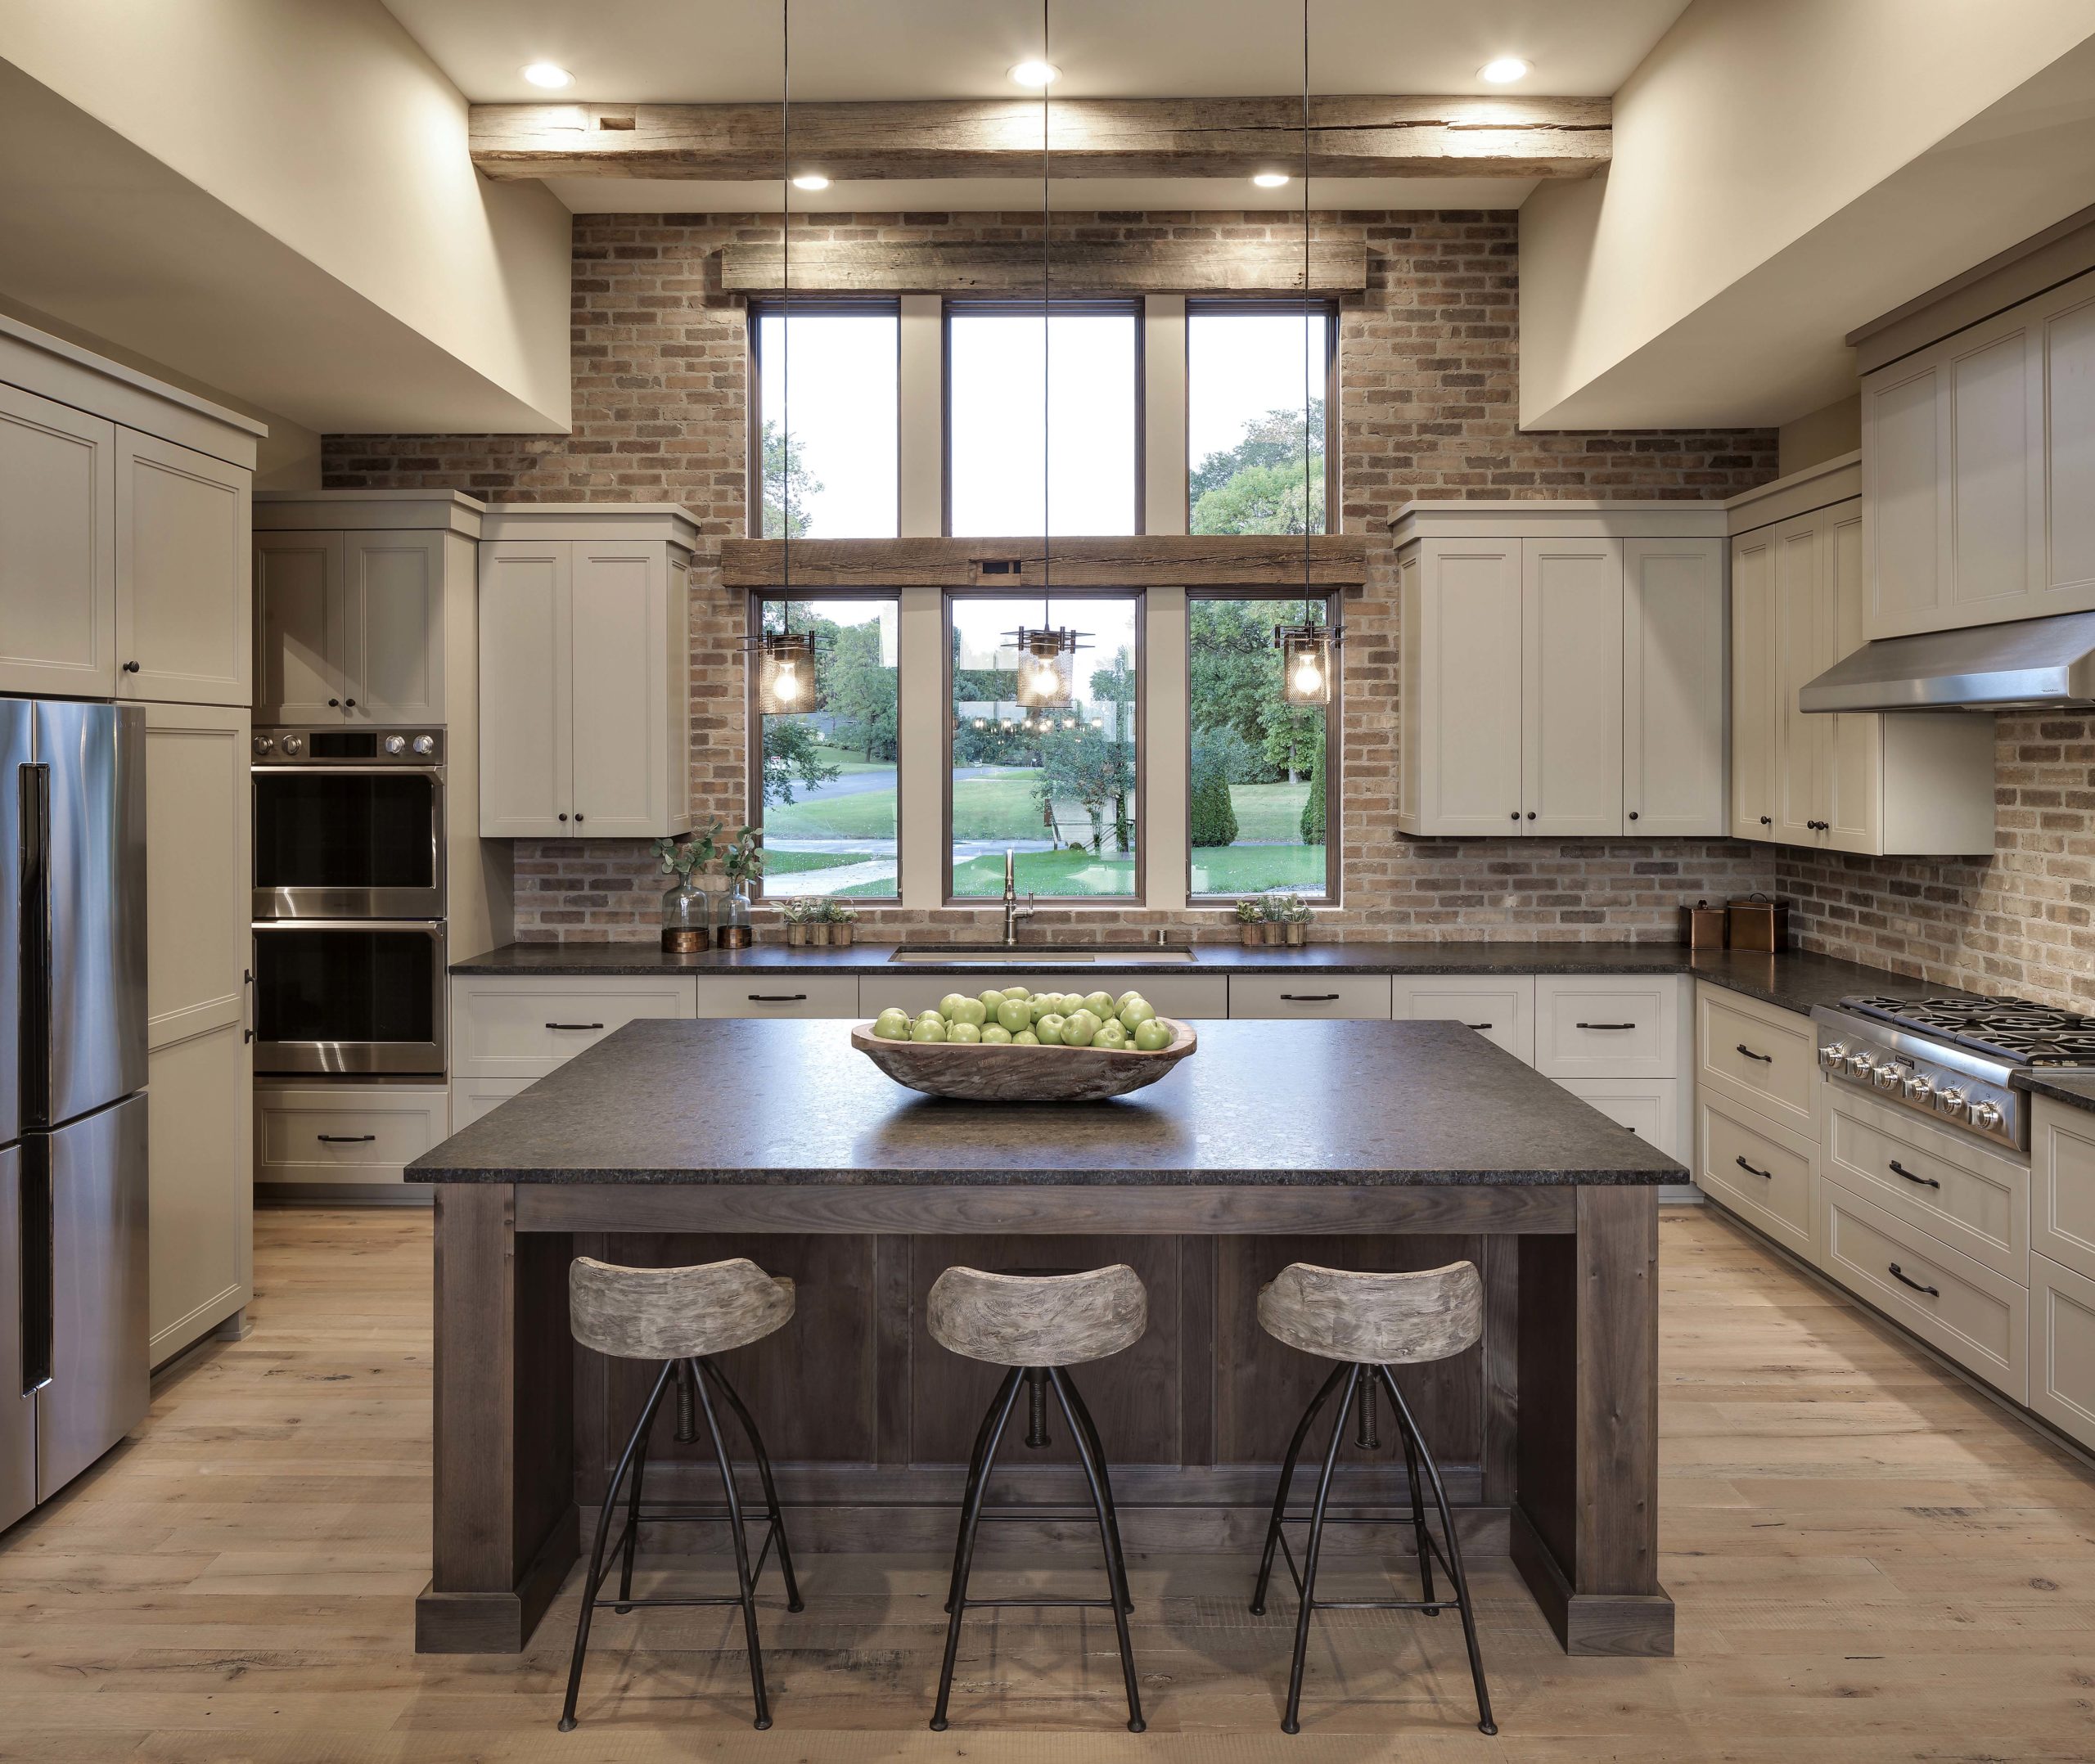 A large kitchen with a center island and stools.